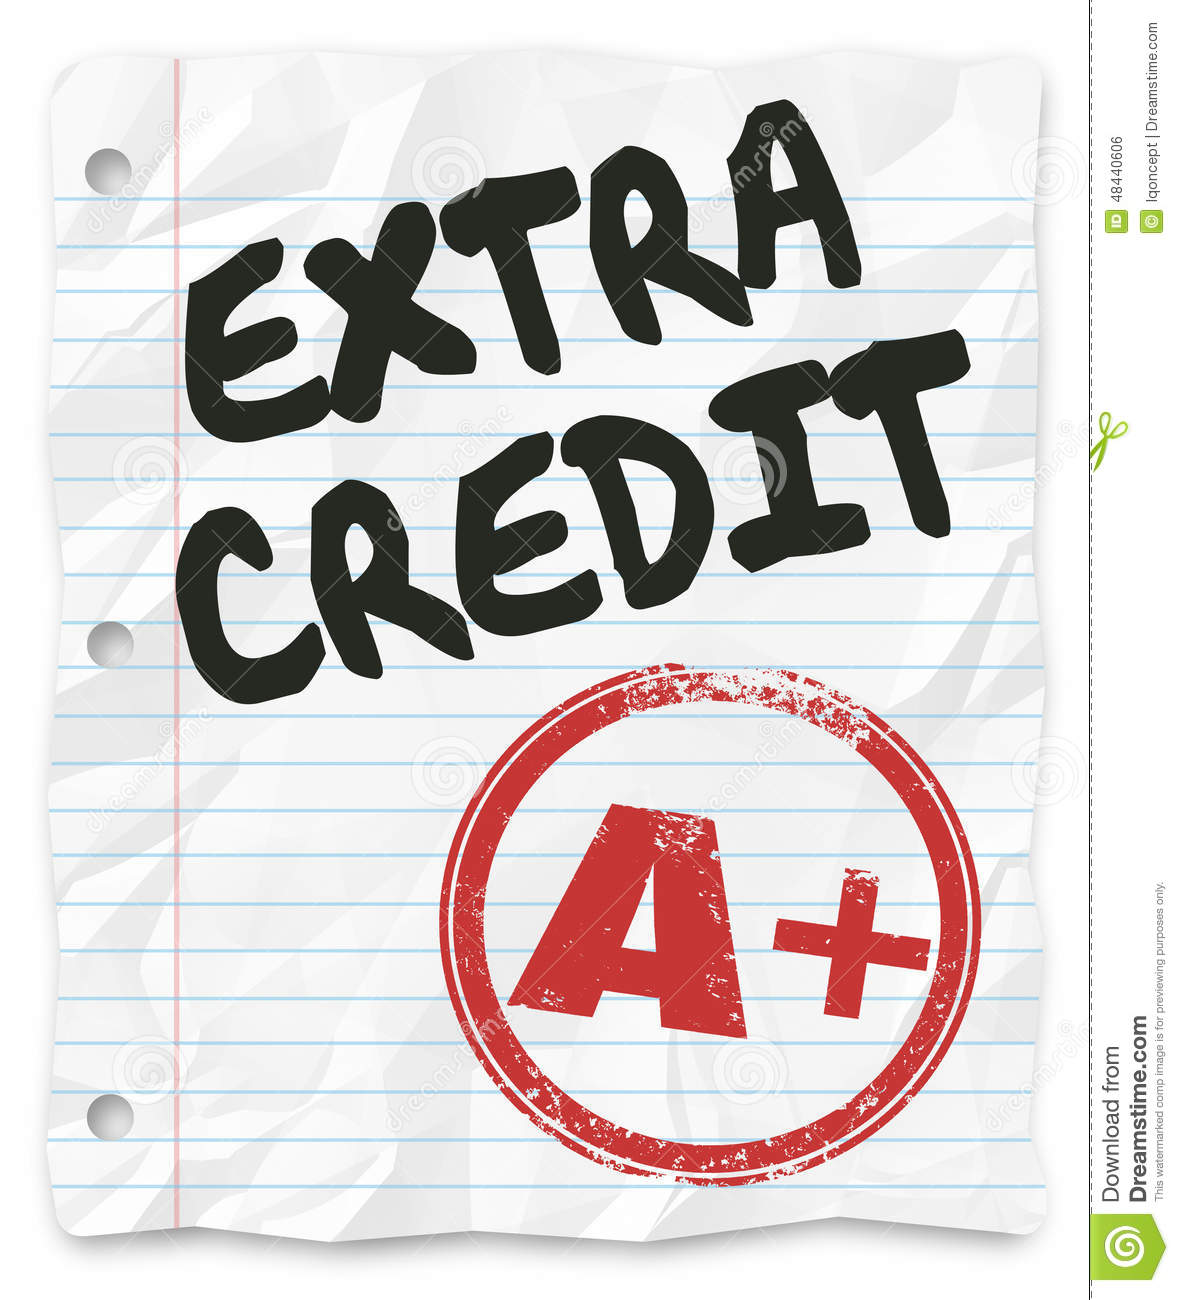 Extra Credit Added Points Results Graded School Paper Homework Stock